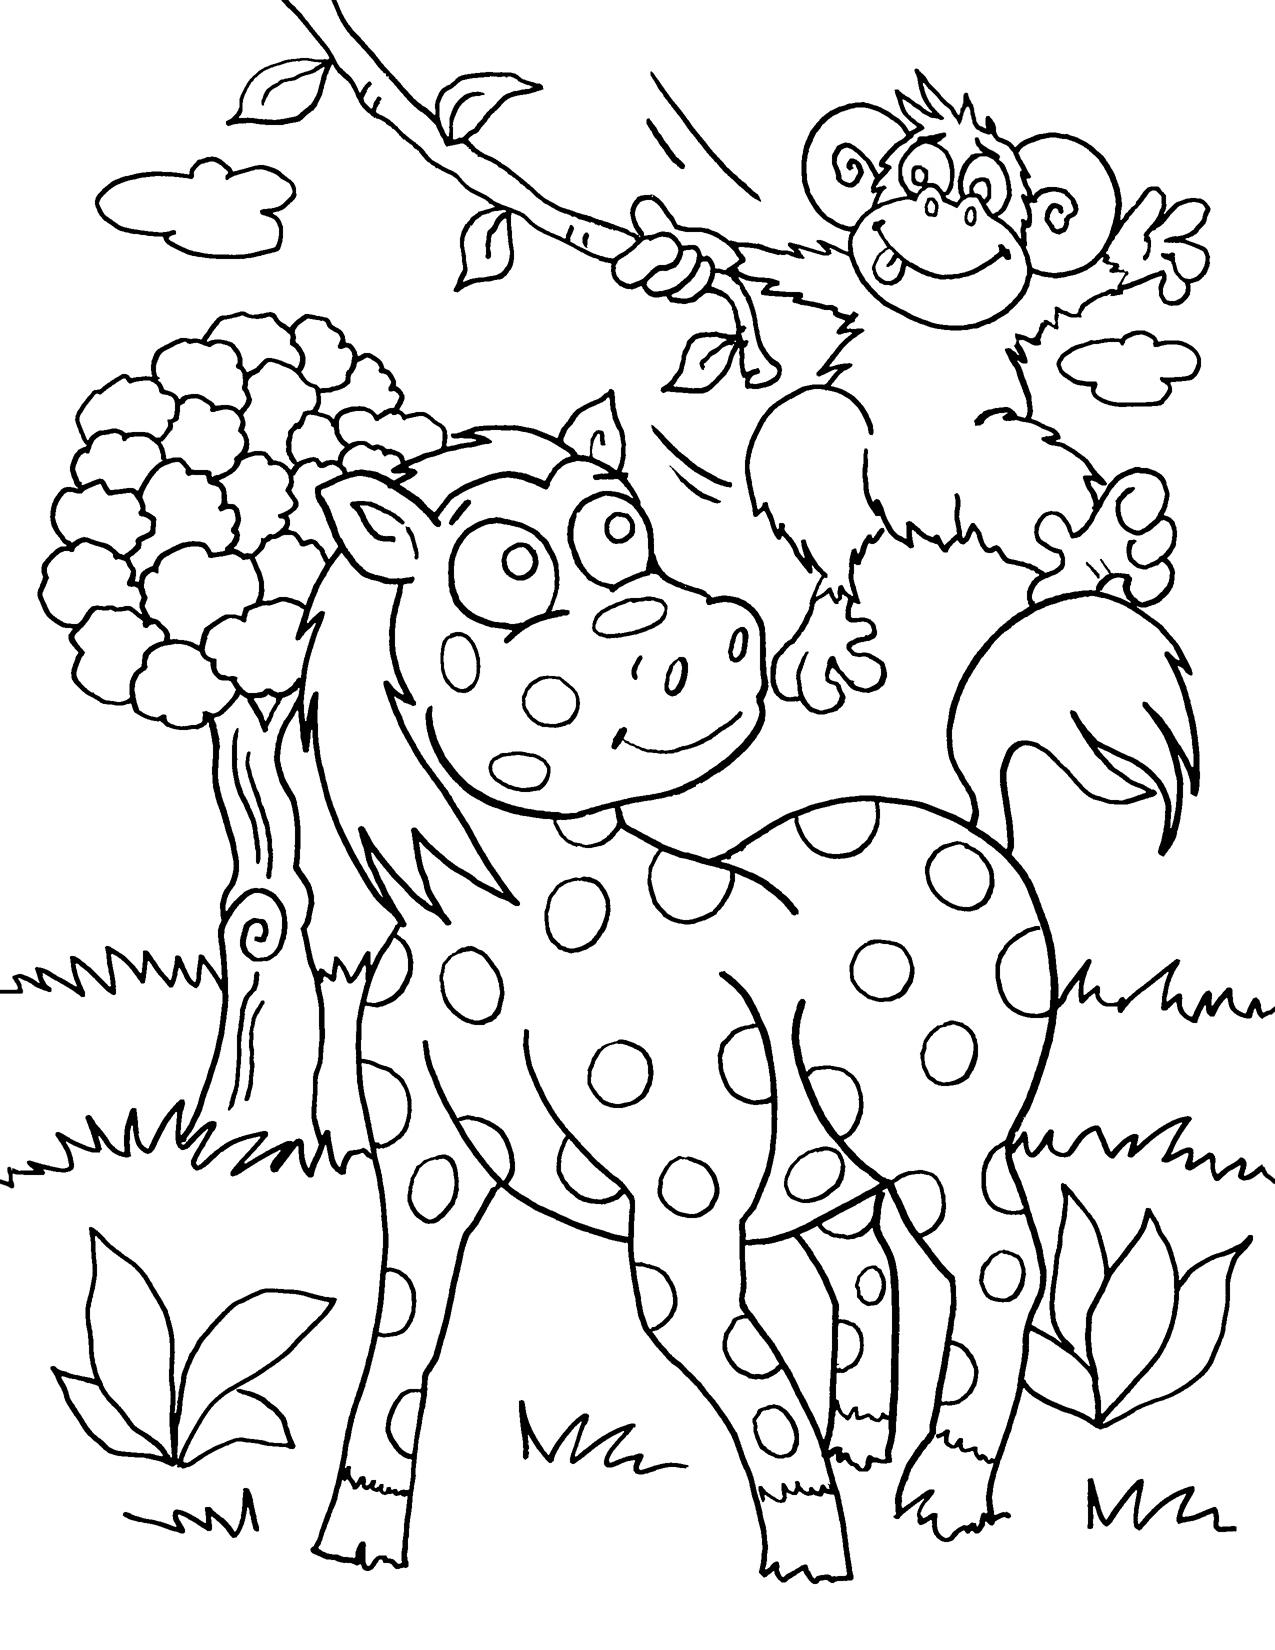 free african animal coloring pages